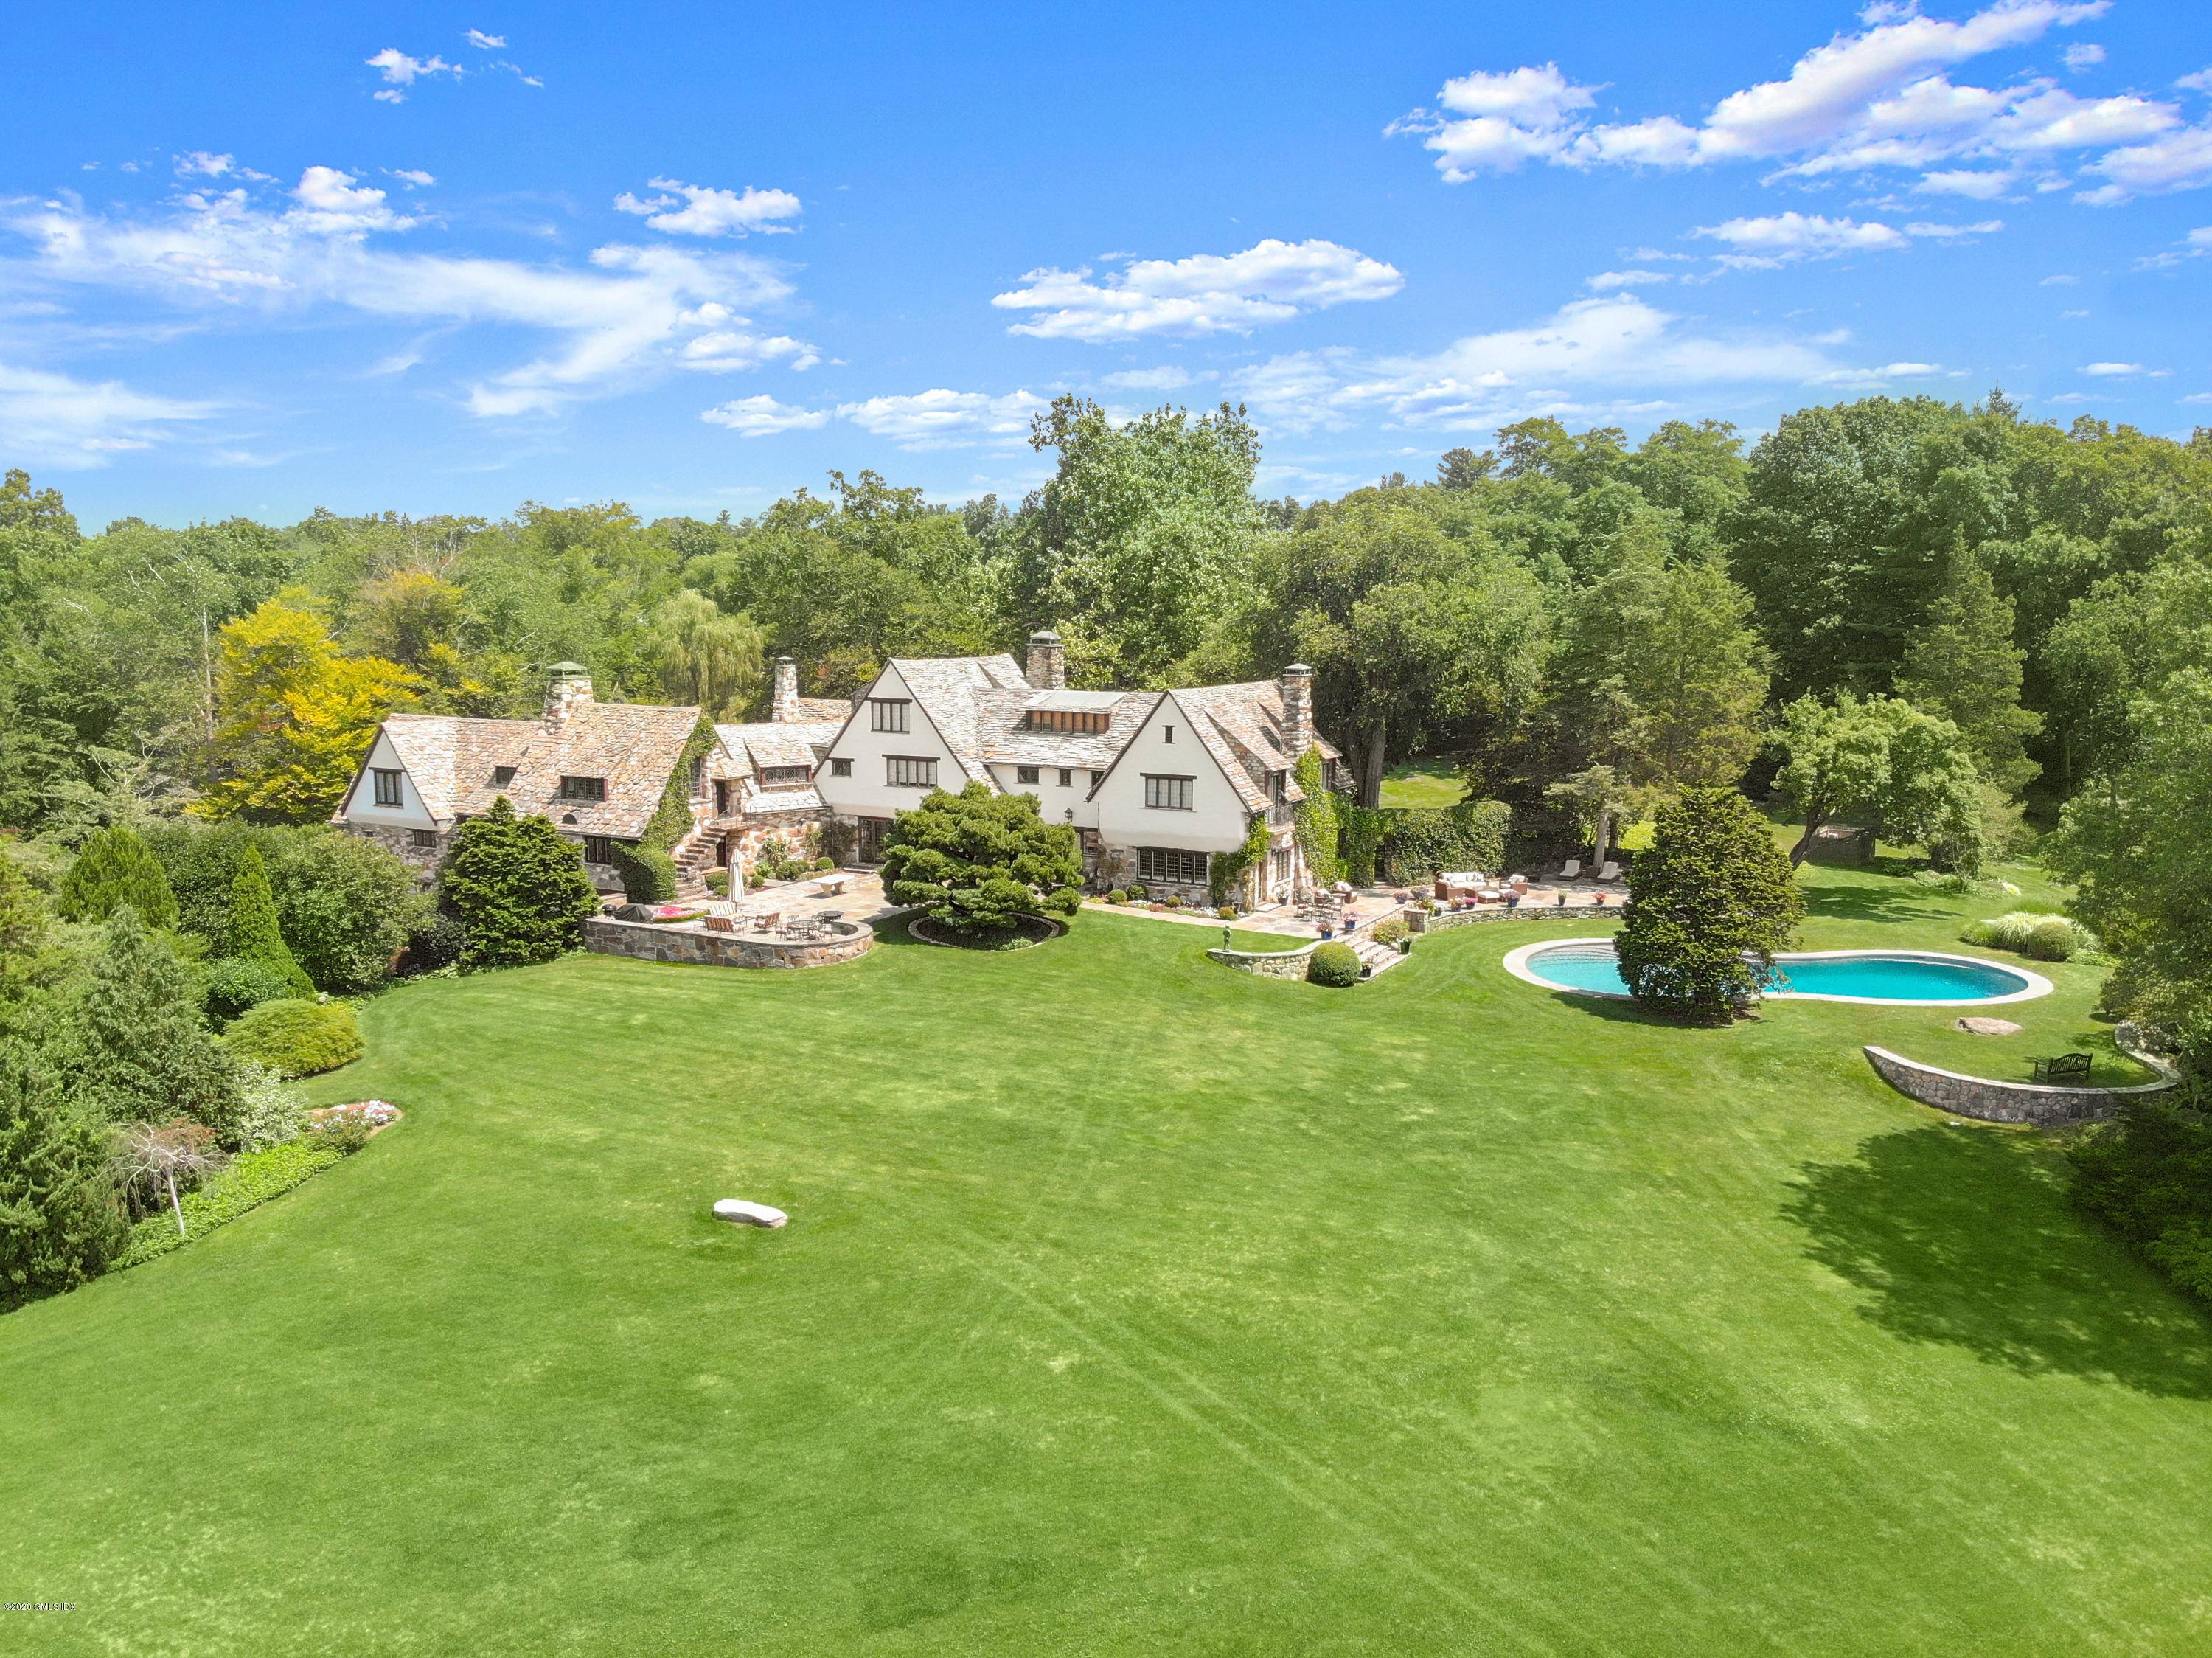 Spectacular 8. 3 acre Round Hill estate approached by a private gated windy drive, 30 Round Hill offers a peaceful mid country retreat with authentic six bedroom English Manor, pool, ...